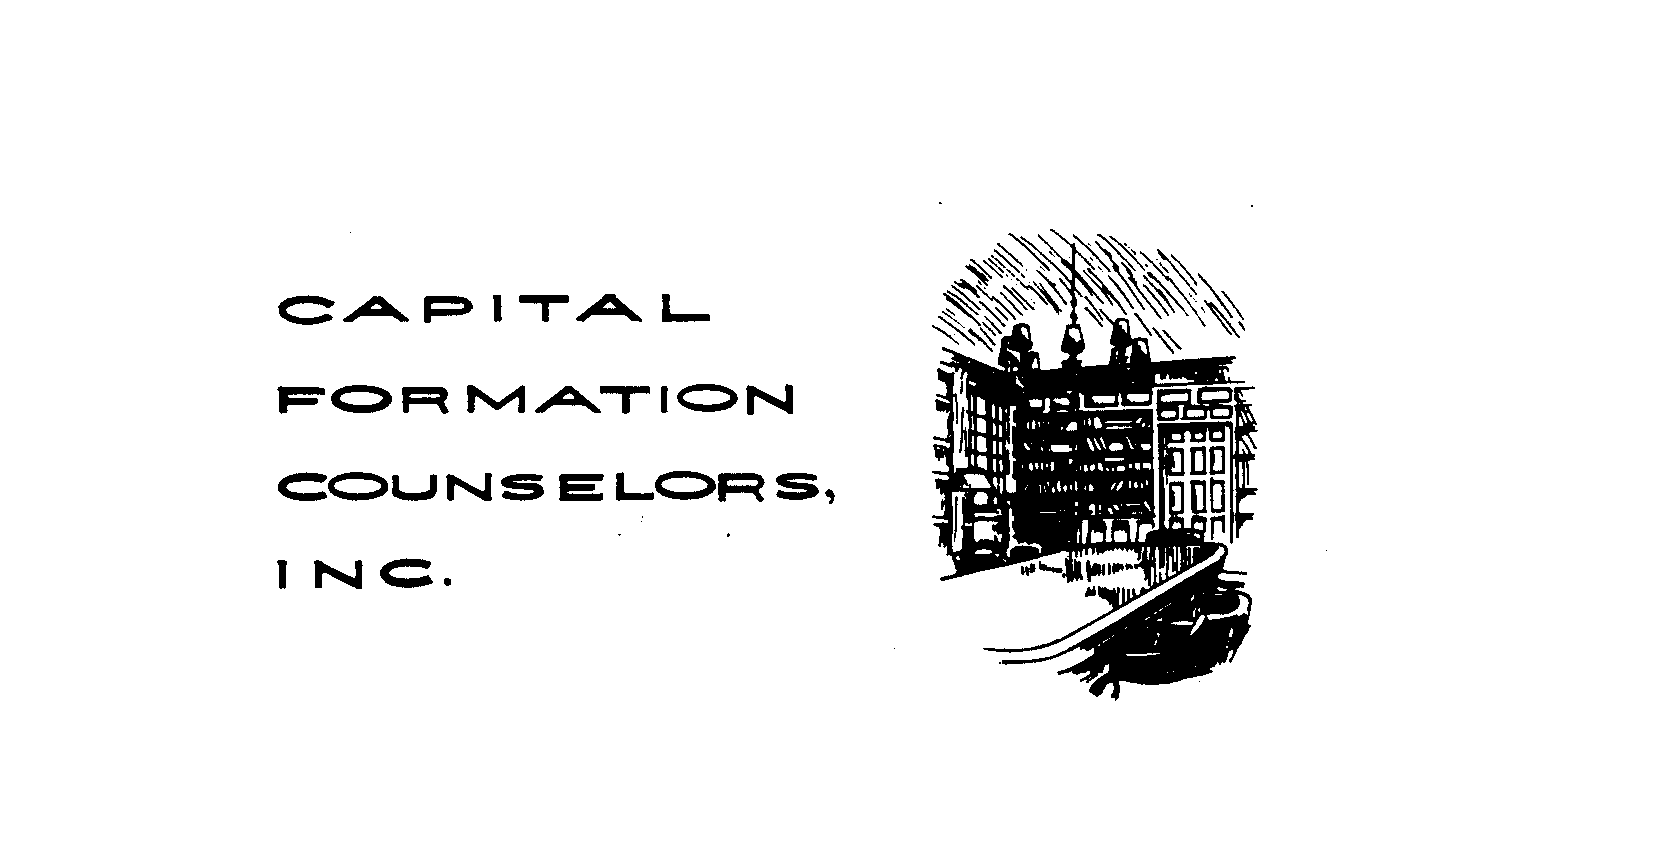  CAPITAL FORMATION COUNSELORS, INC.